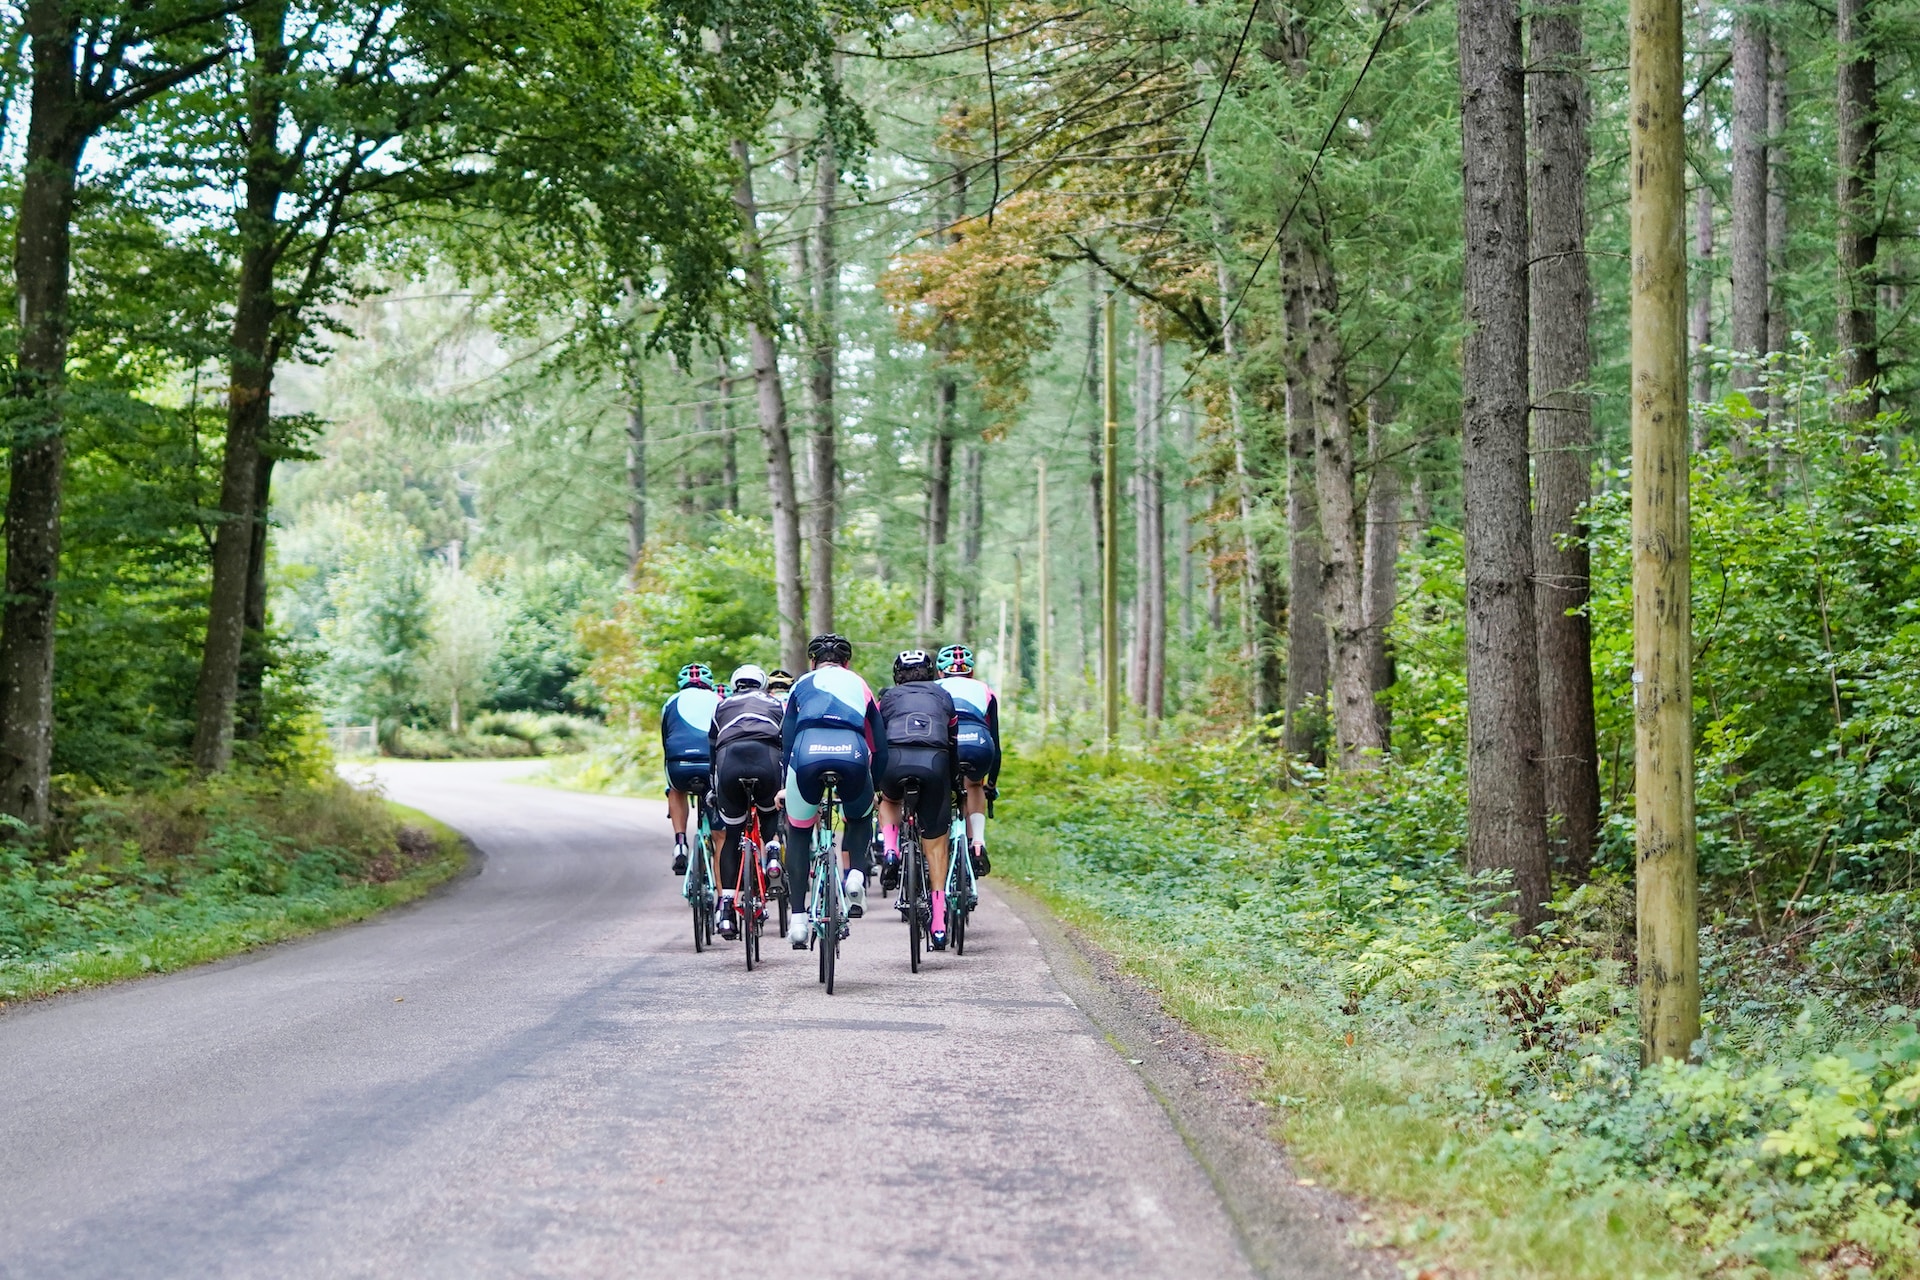 the image shows a group of professional athletes doing a cycling triathlon